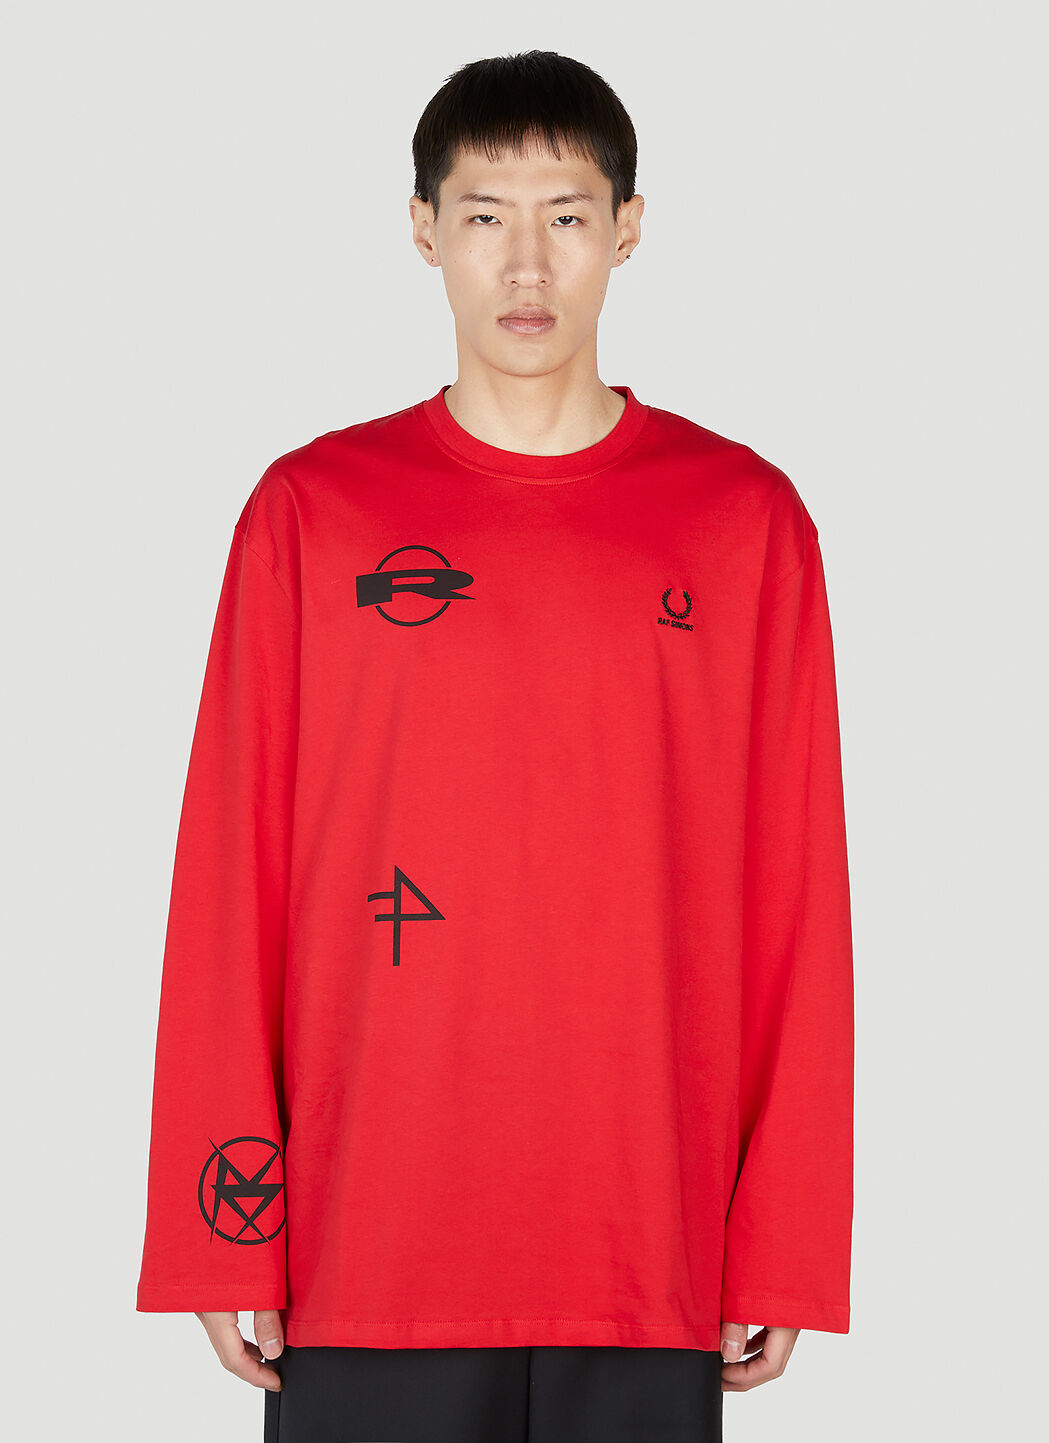 Raf Simons x Fred Perry 印花长袖 T 恤 黑色 rsf0152002